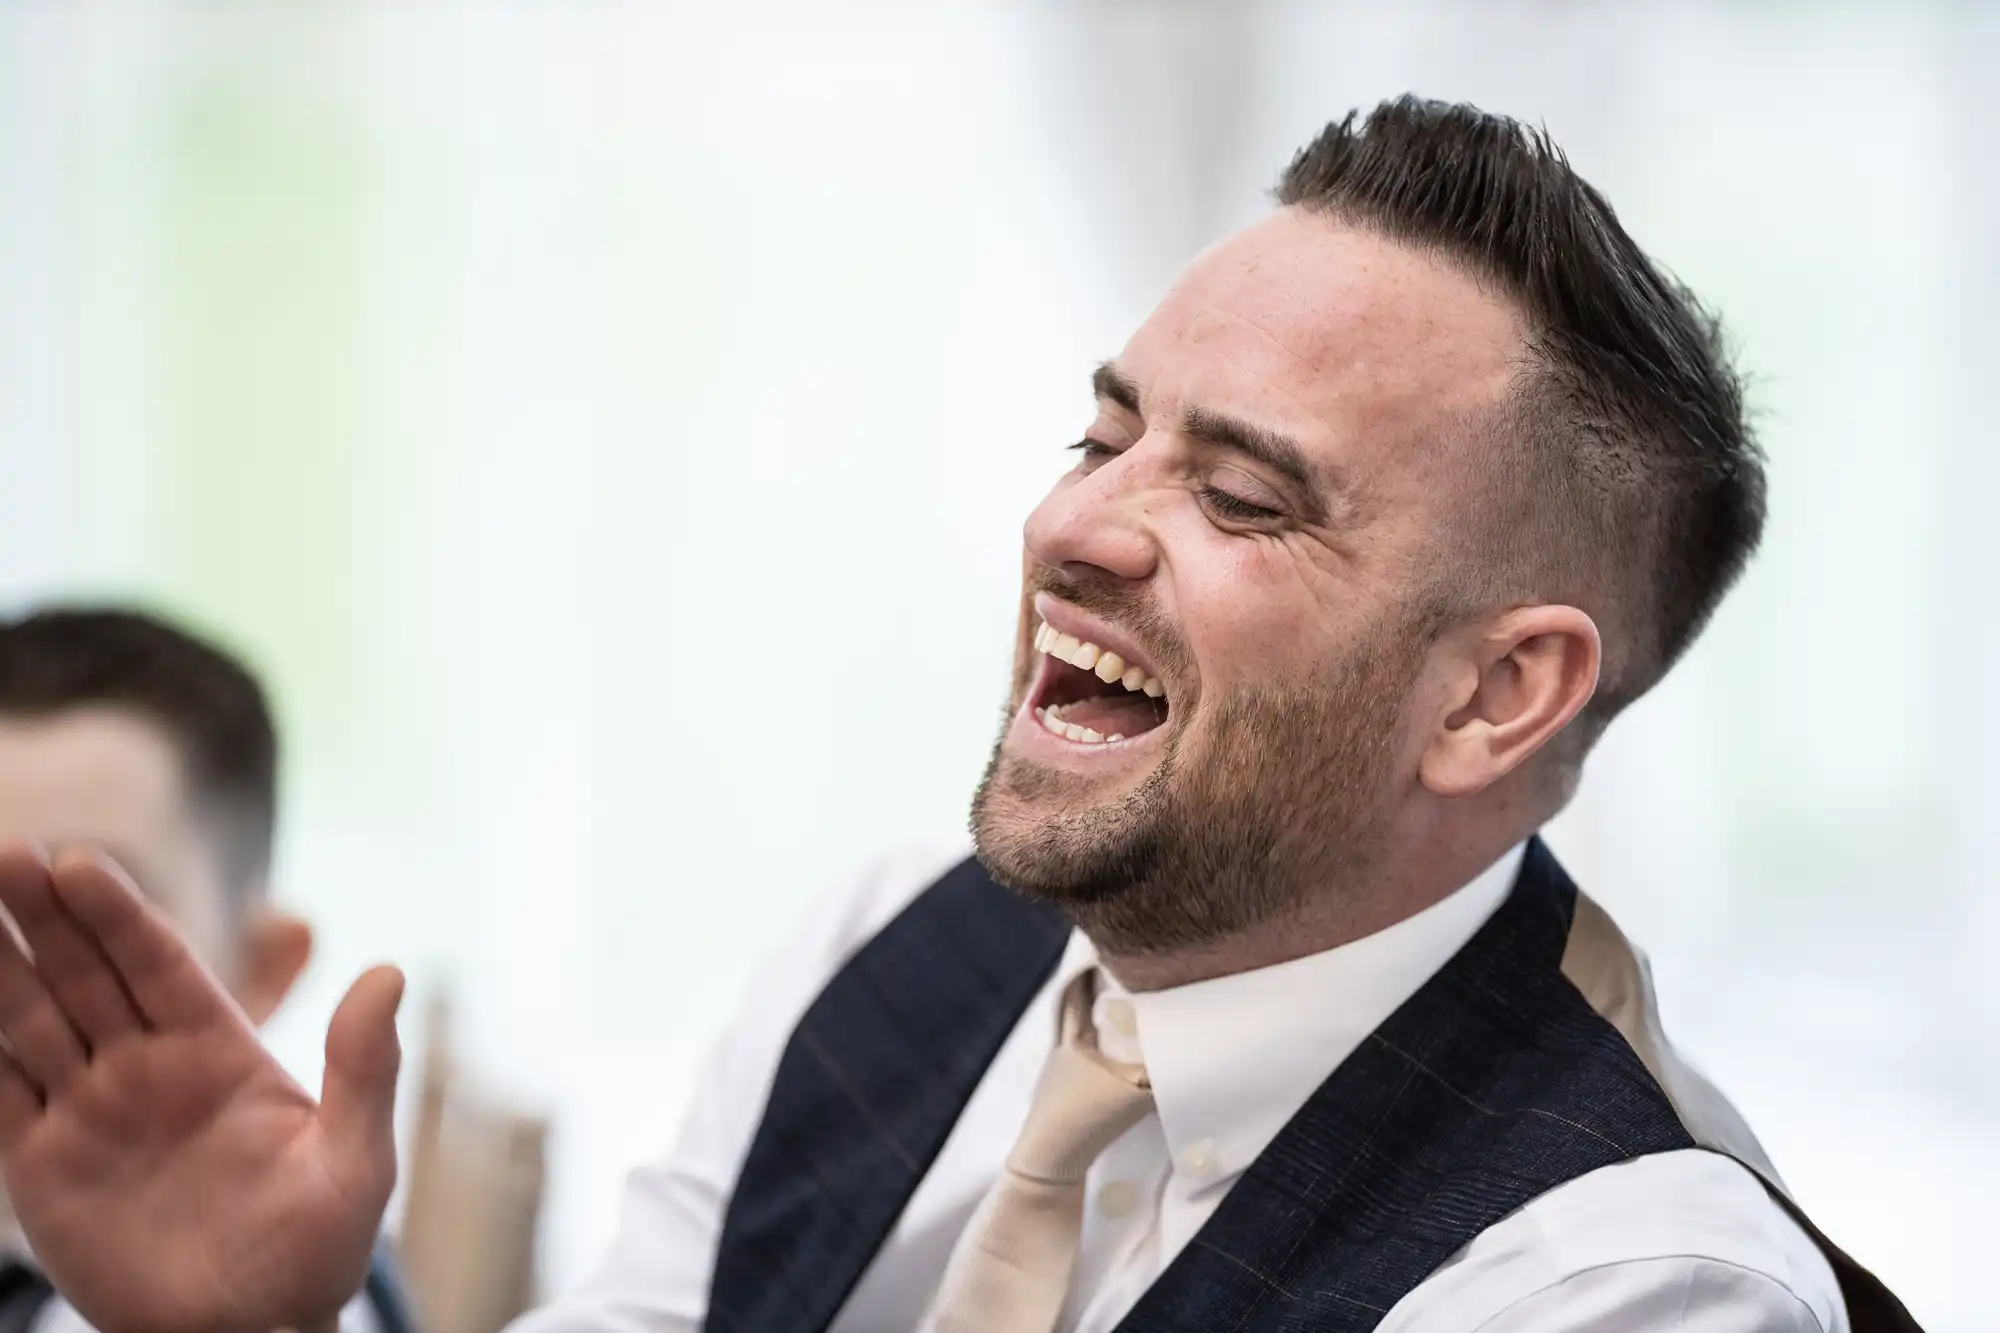 A man wearing a suit with a vest and tie is laughing heartily, with his mouth open and eyes closed.